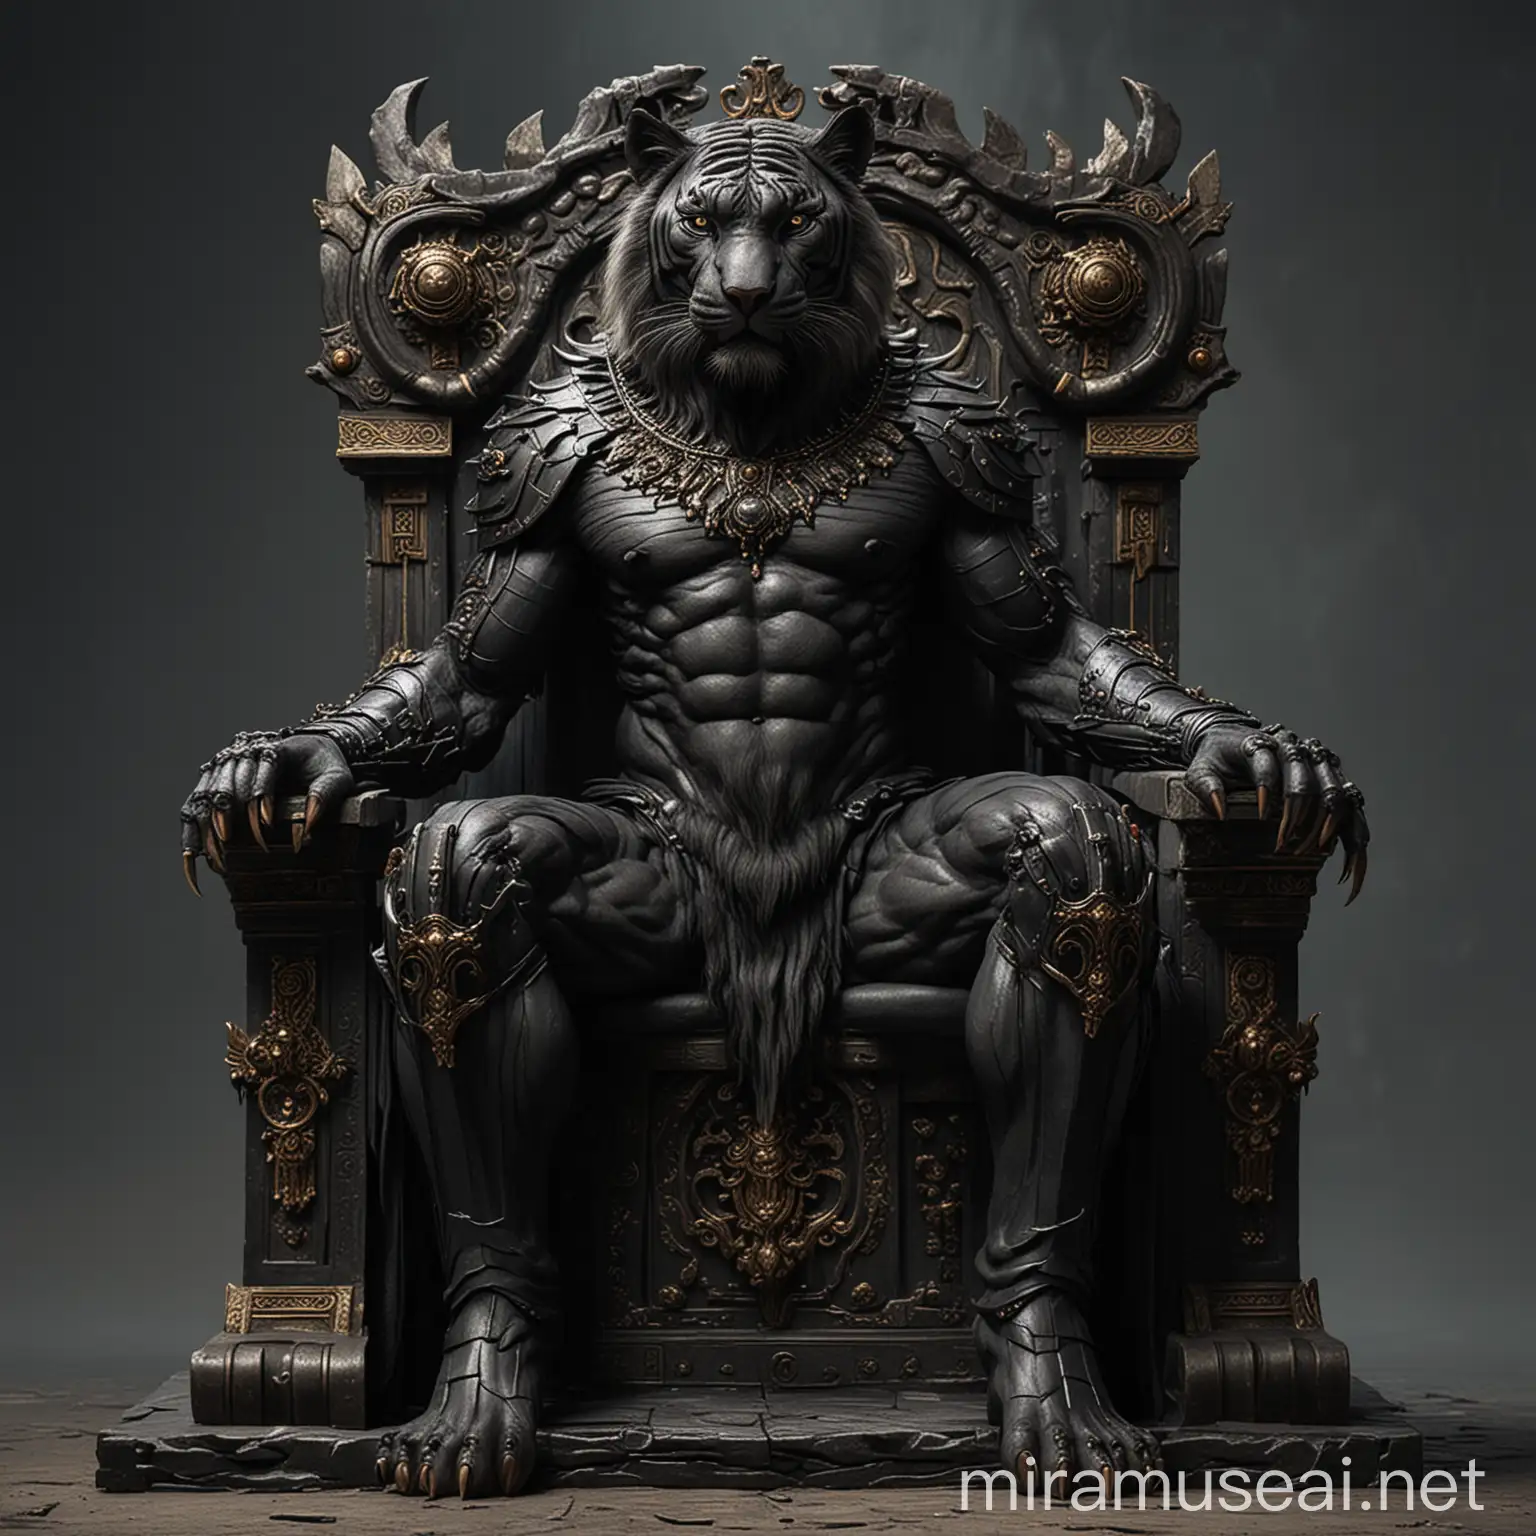 Regal Black Tiger Seated on Throne